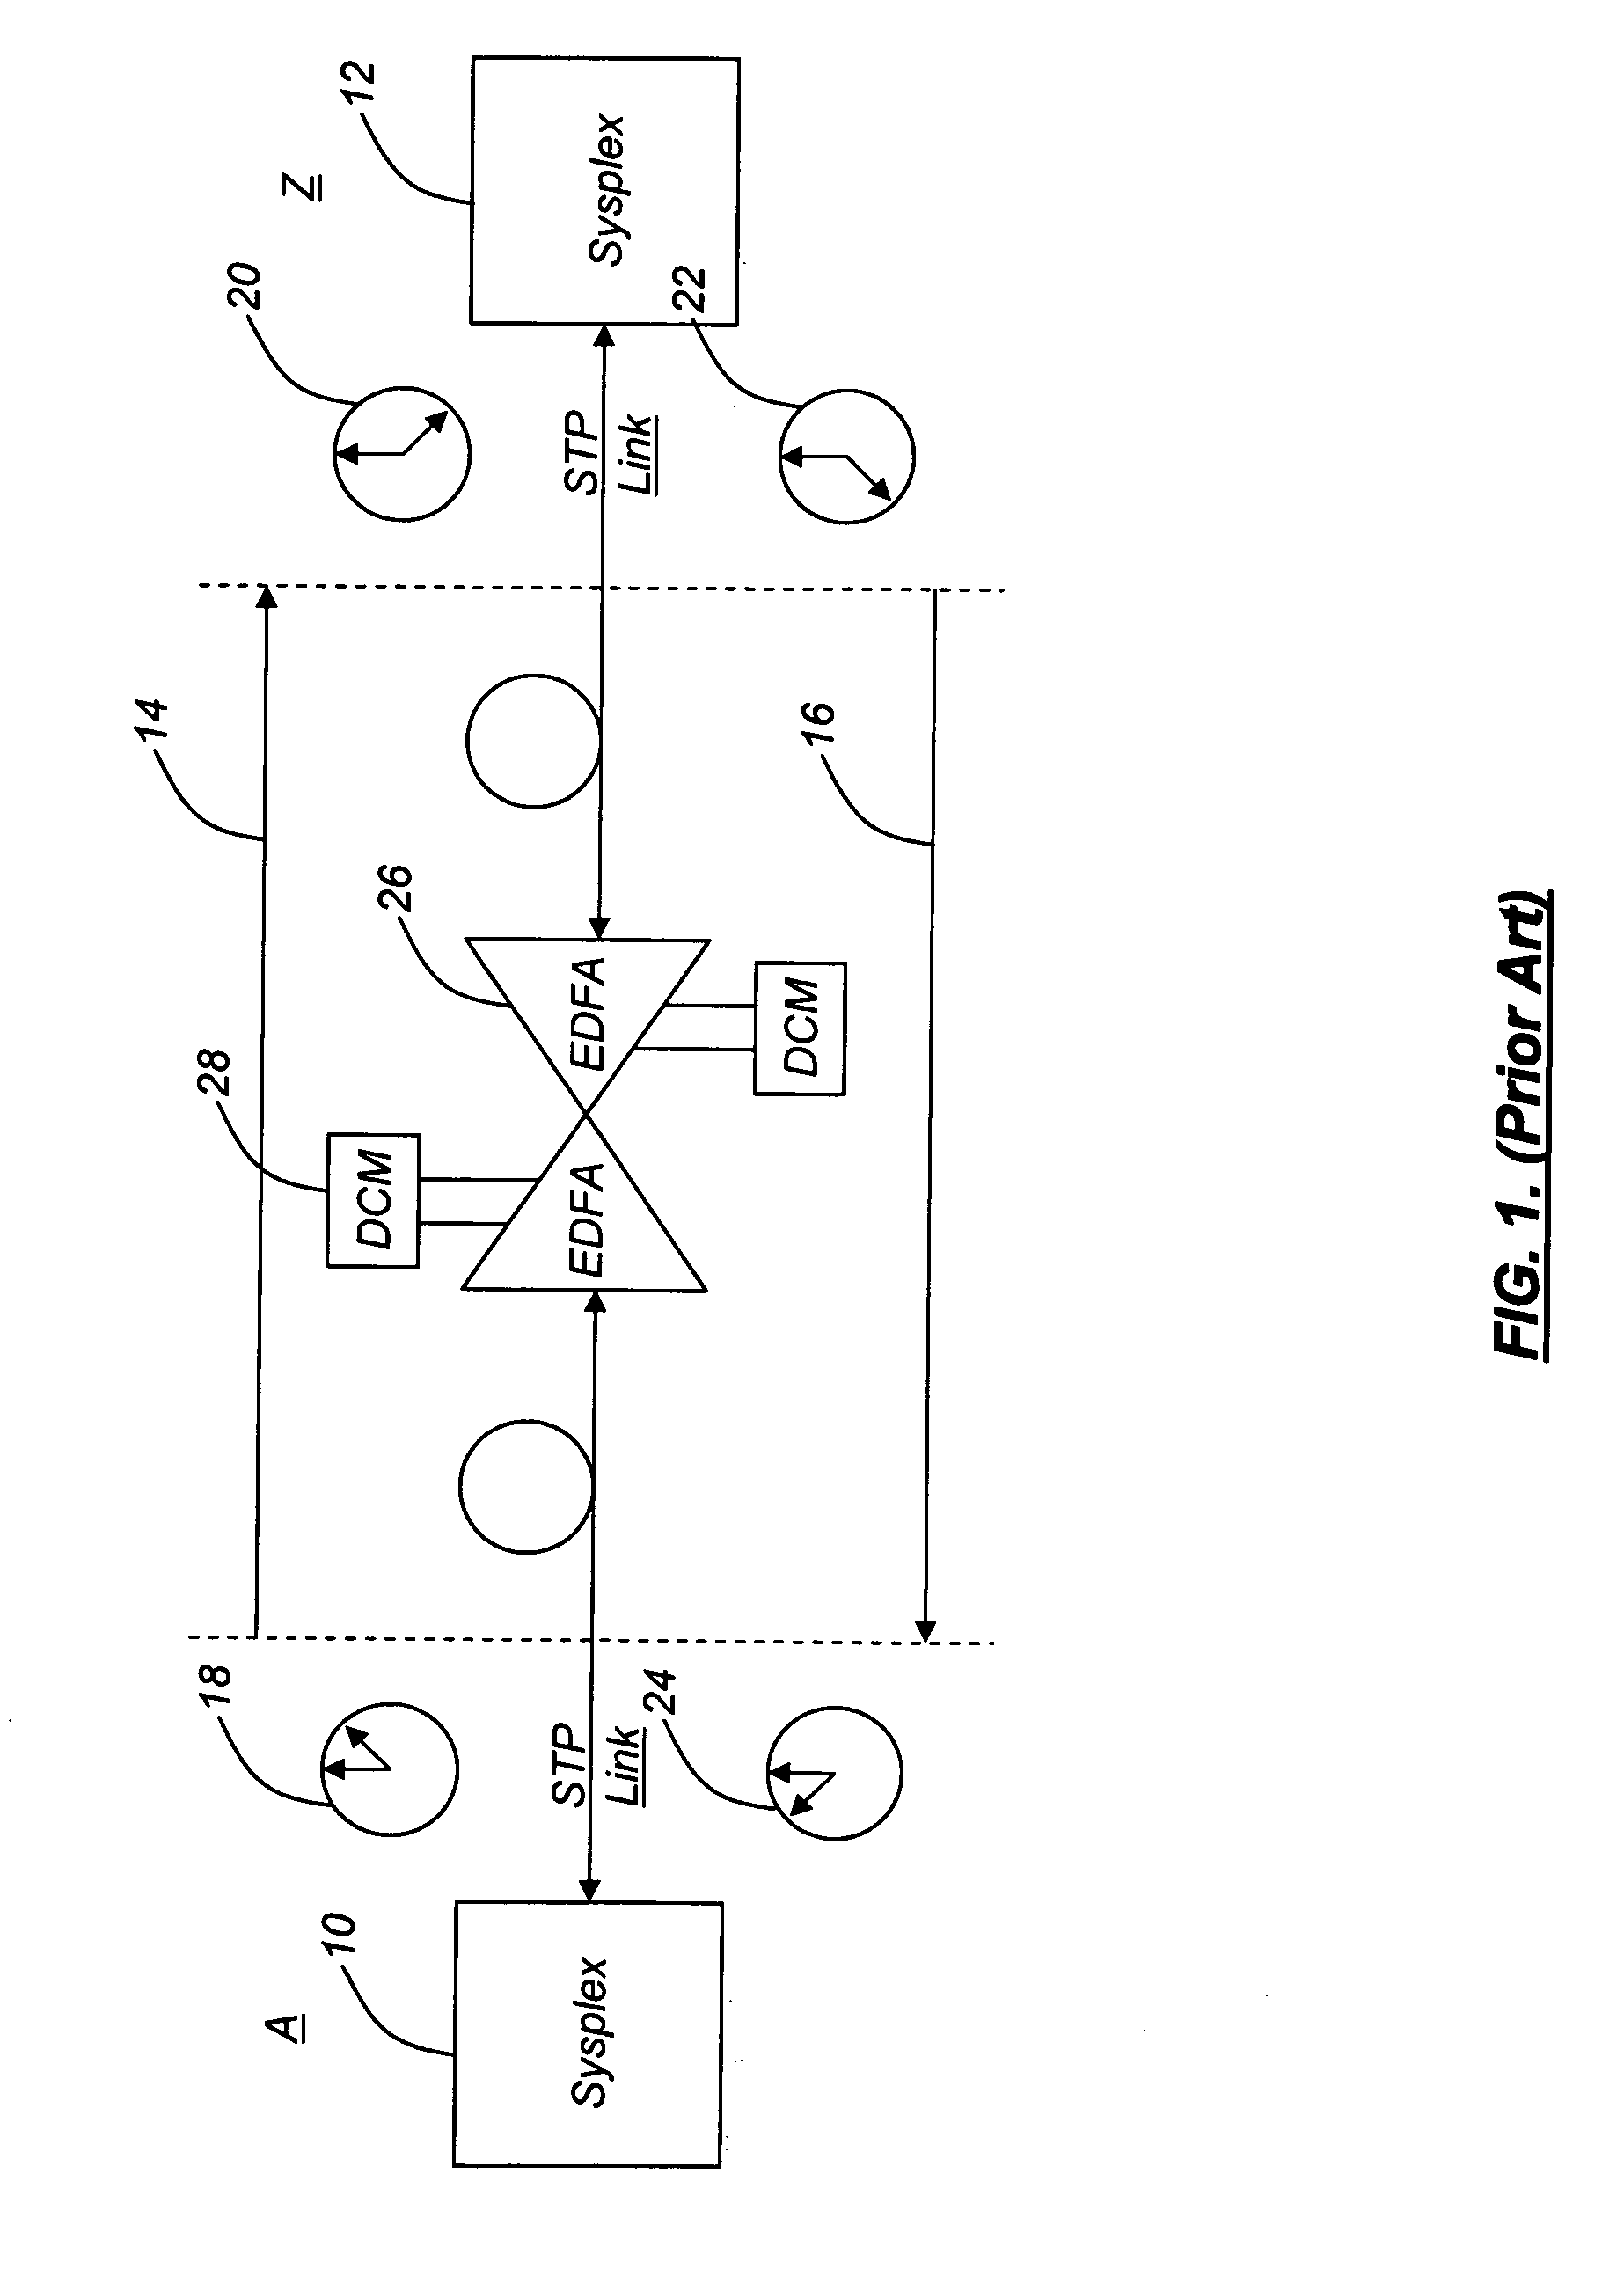 Transport systems and methods incorporating absolute time references and selective buildout delays